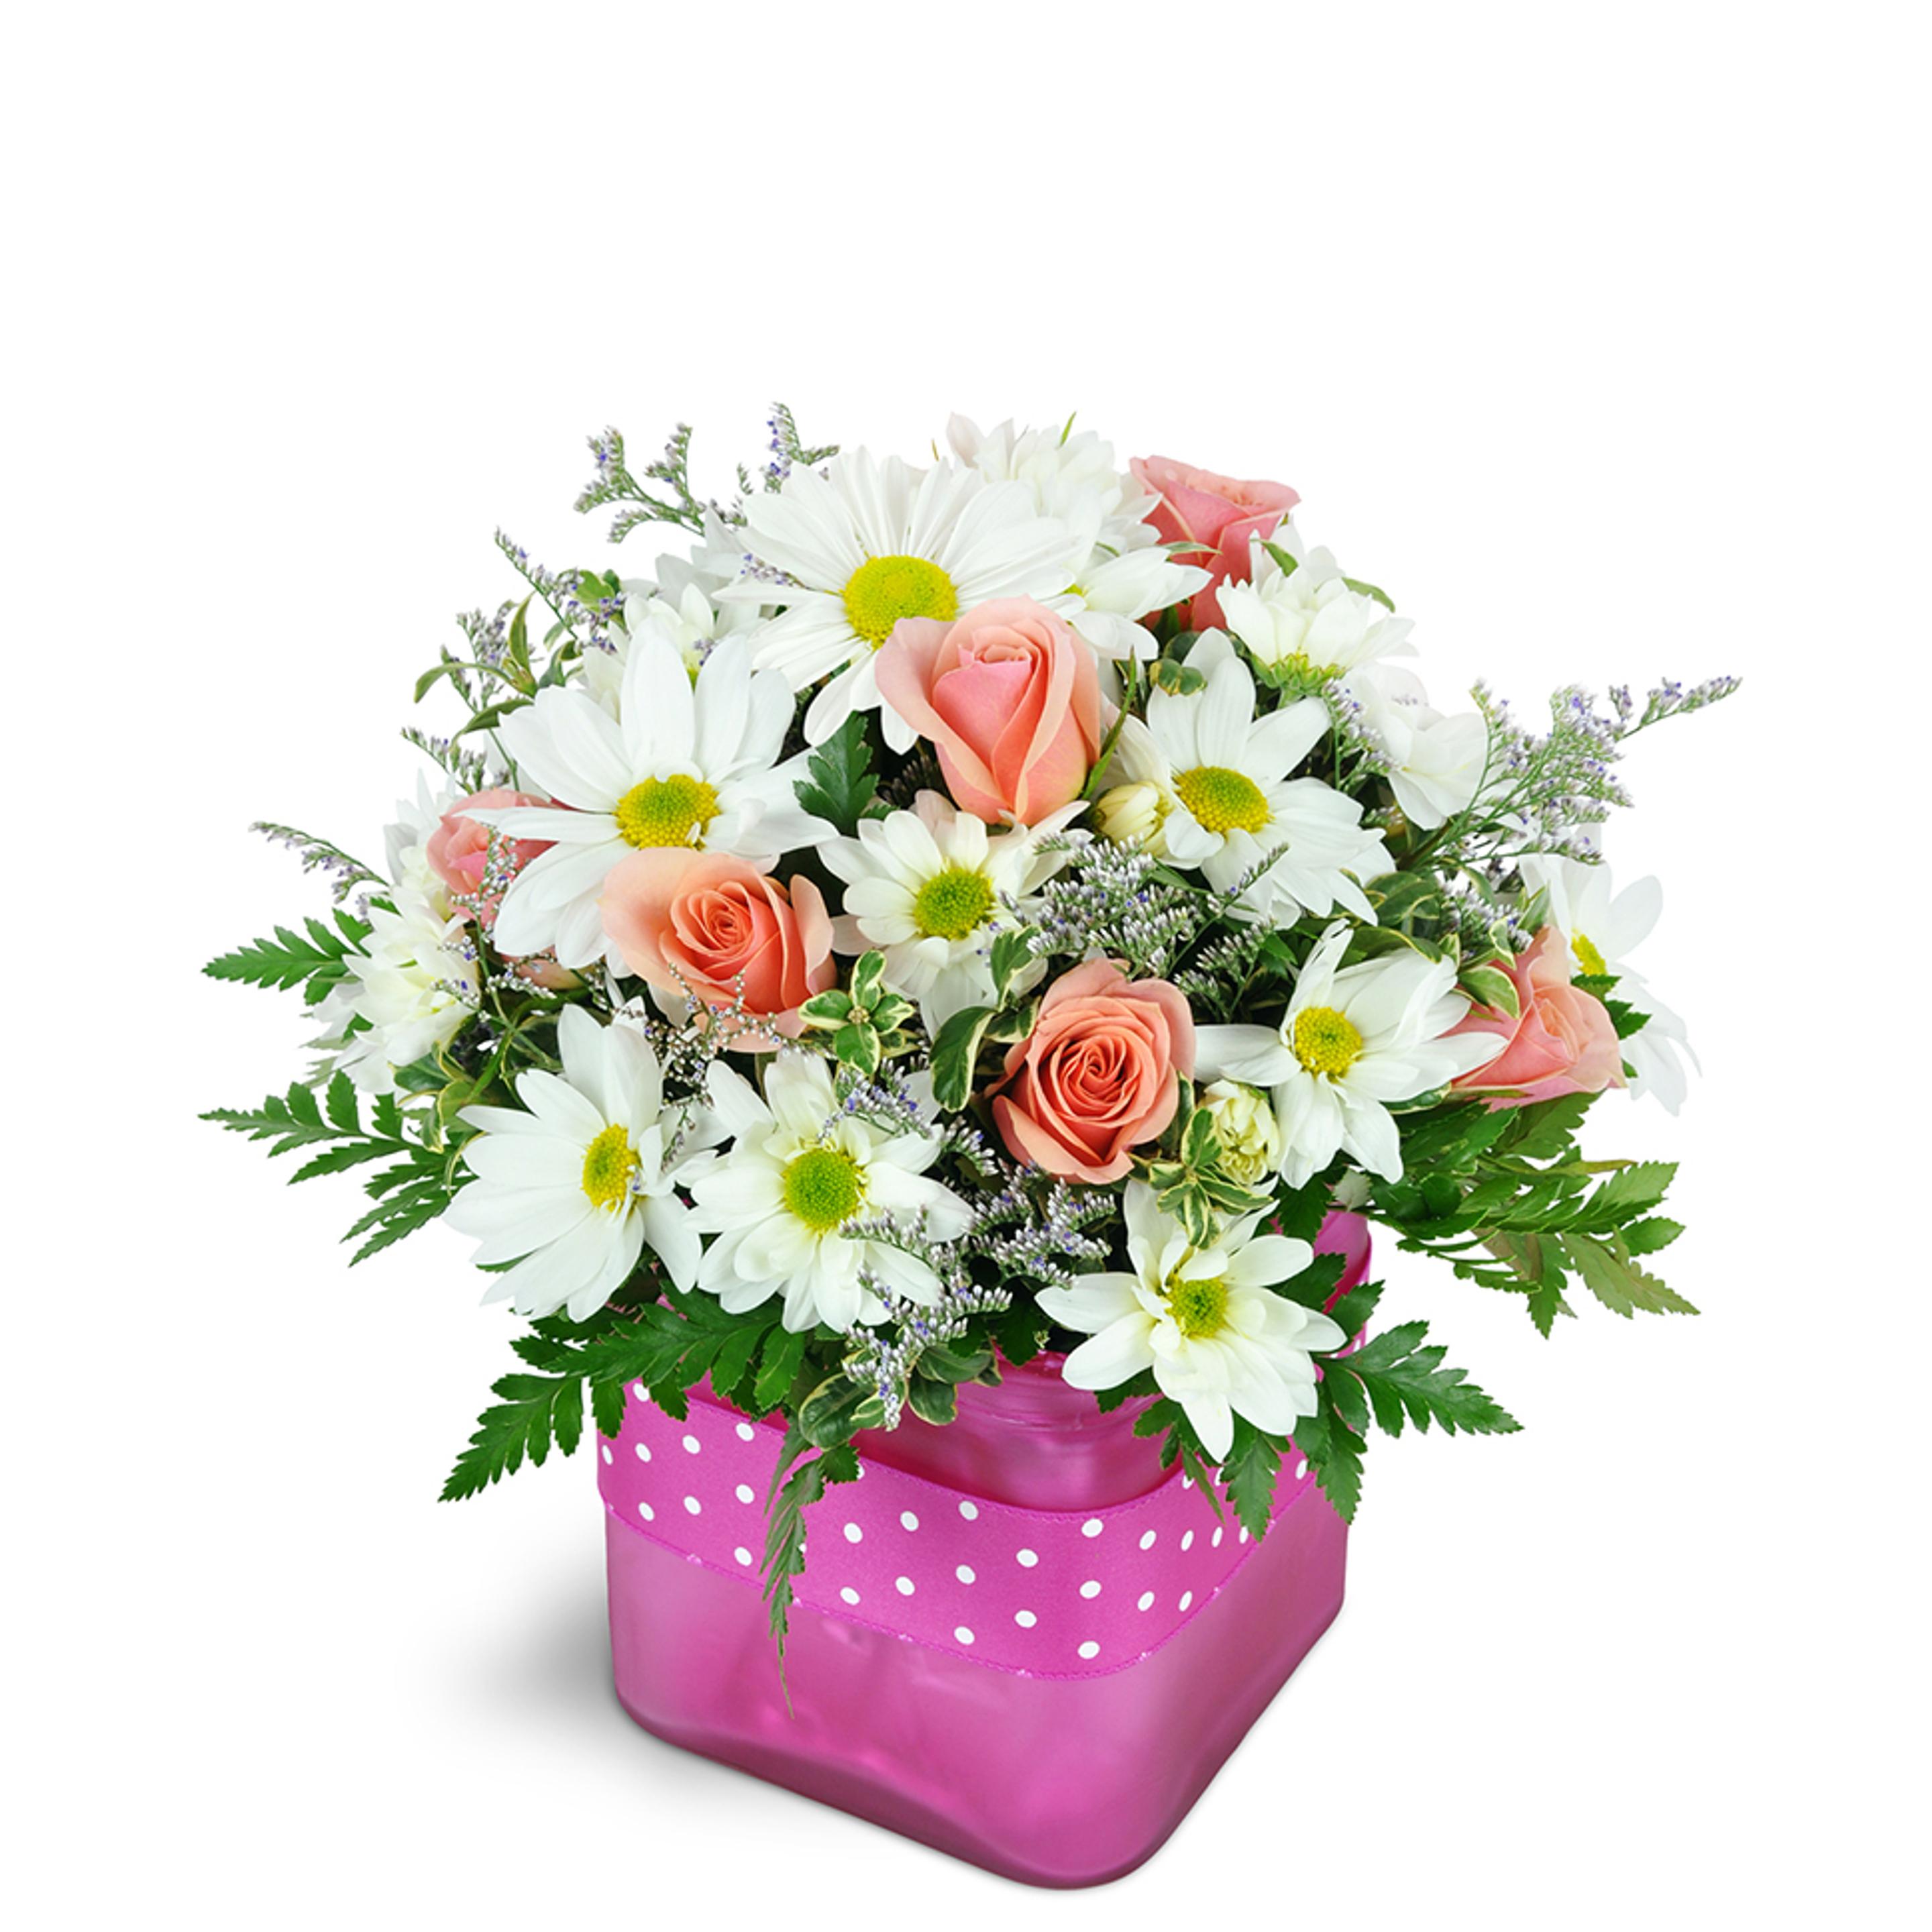 Fun floral arrangement featuring peach roses and white daisies in a bright pink polka-dotted vase.